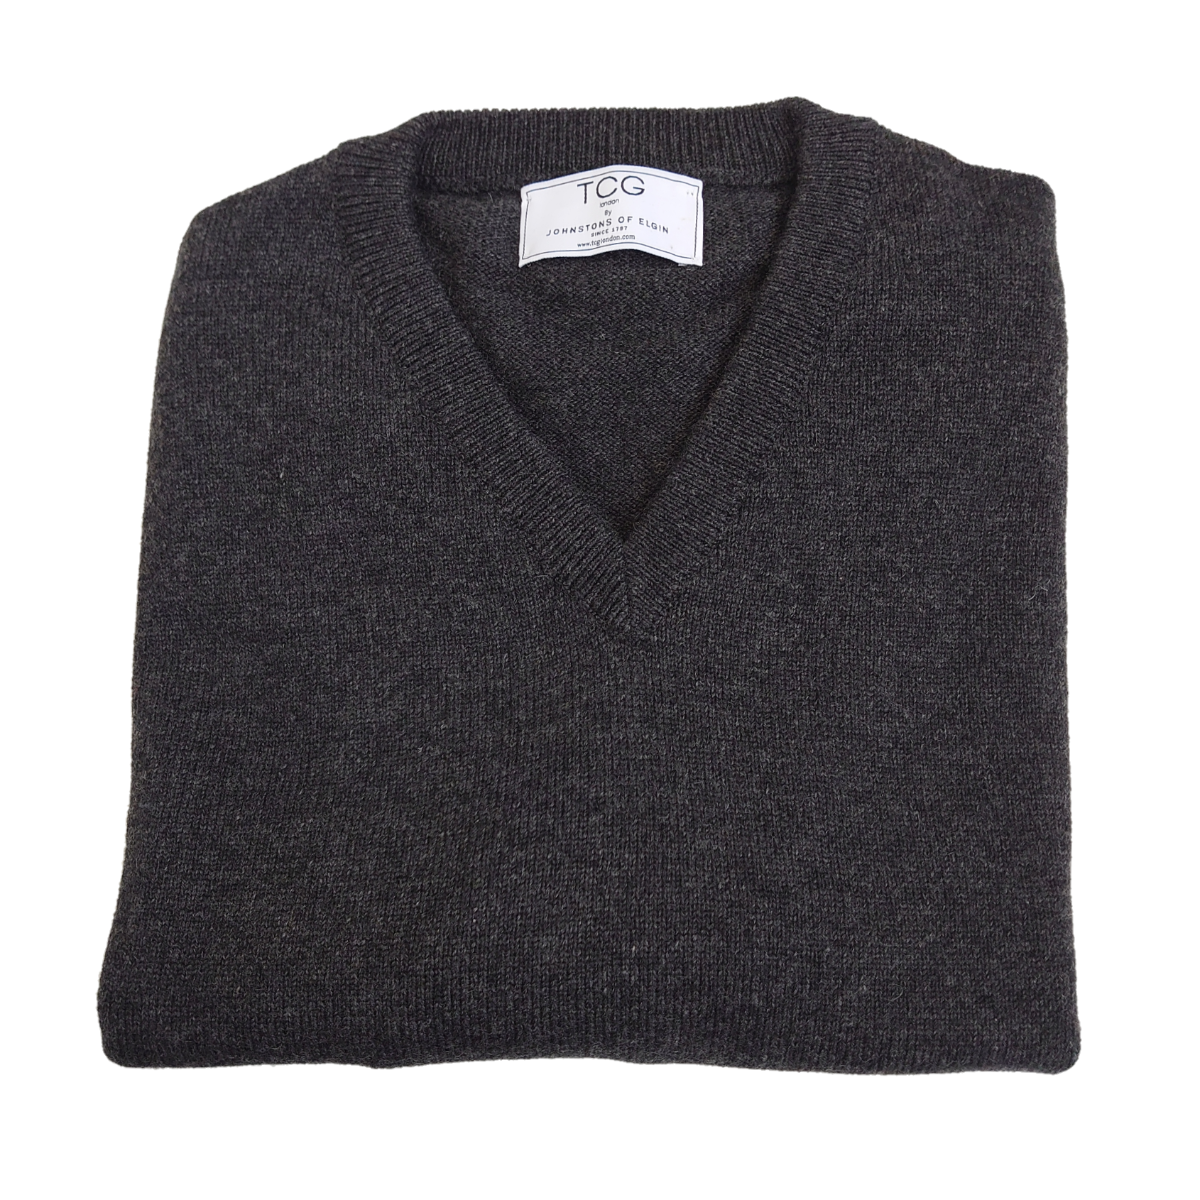 Men's Relaxed Fit V-Neck 100% Pure Cashmere Jumper - Charcoal Grey - S